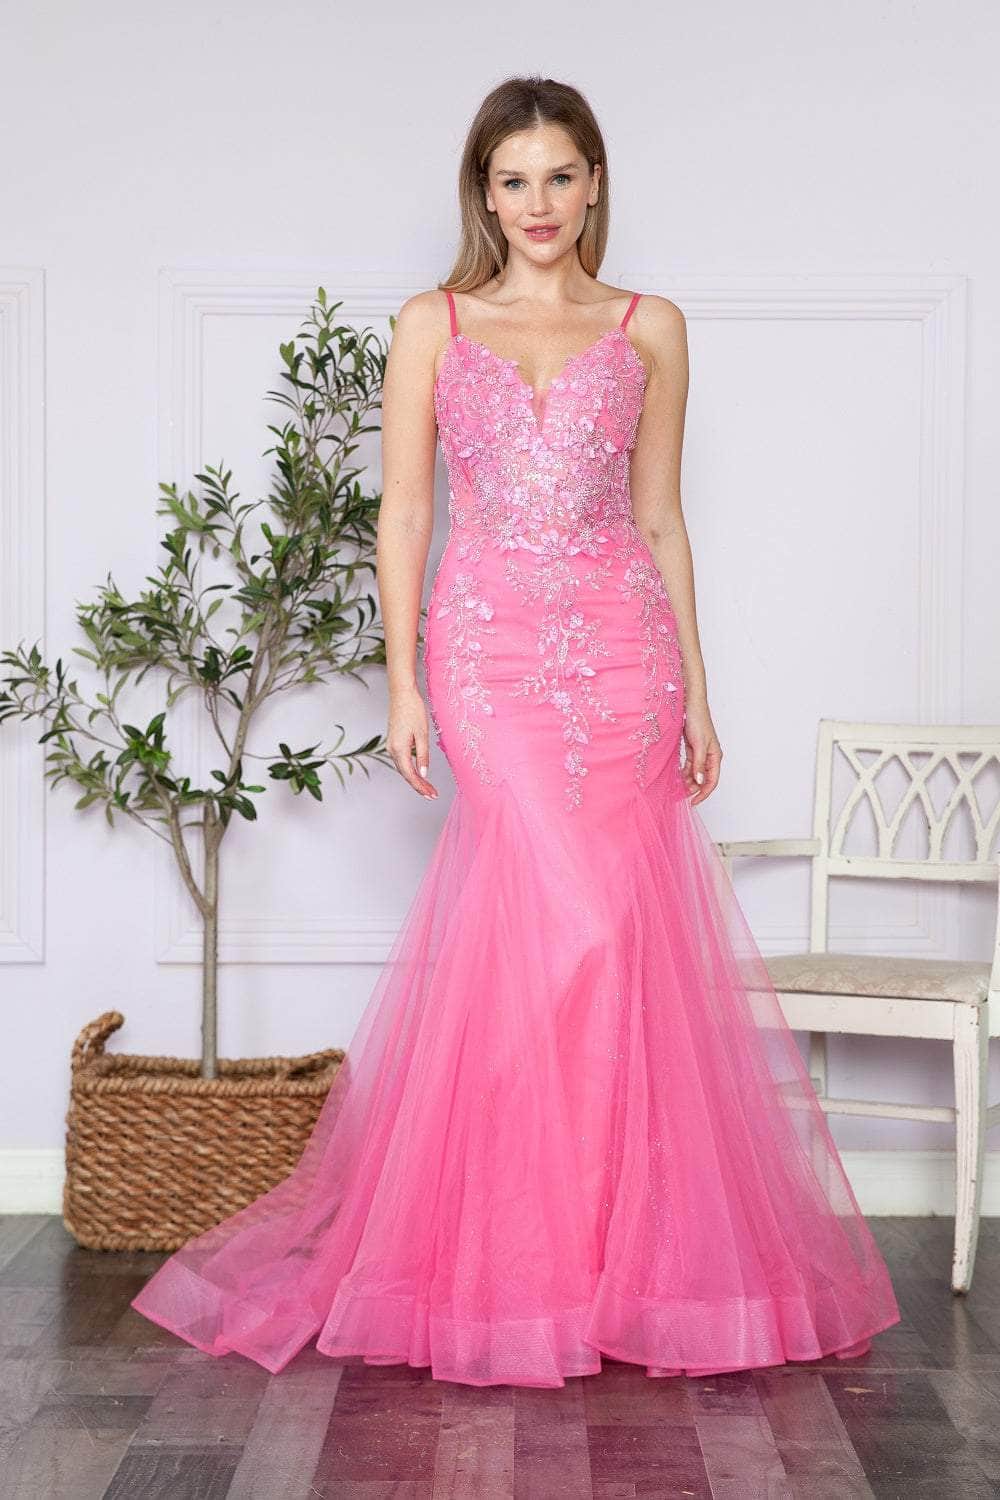 Poly USA 9374 - Appliqued See-through Corset Prom Dress
